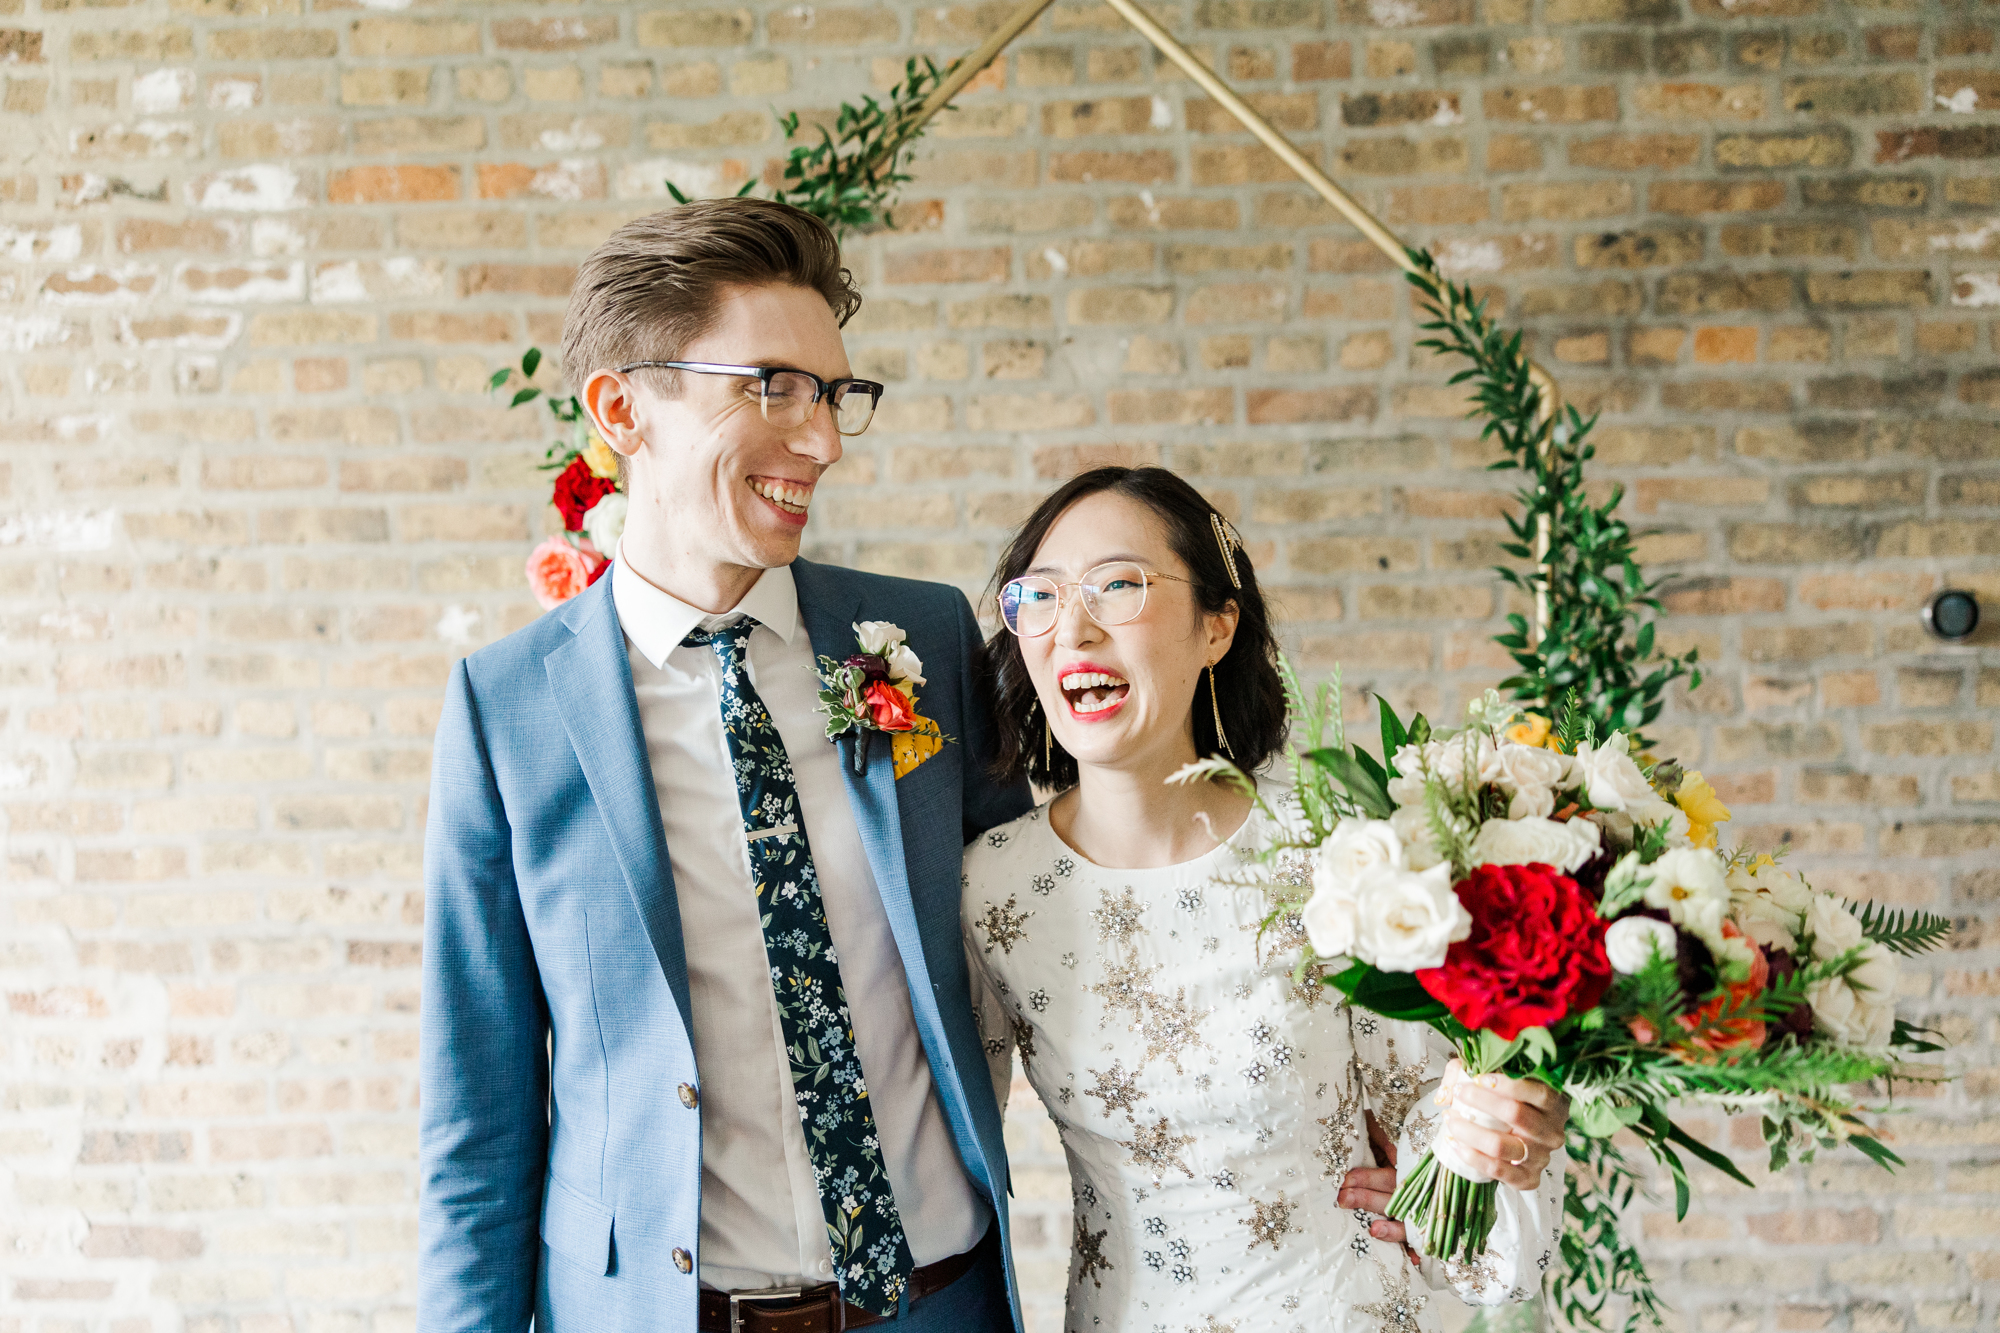 Lovely Chicago Micro Wedding Photos at Wicker Park Inn in Fall